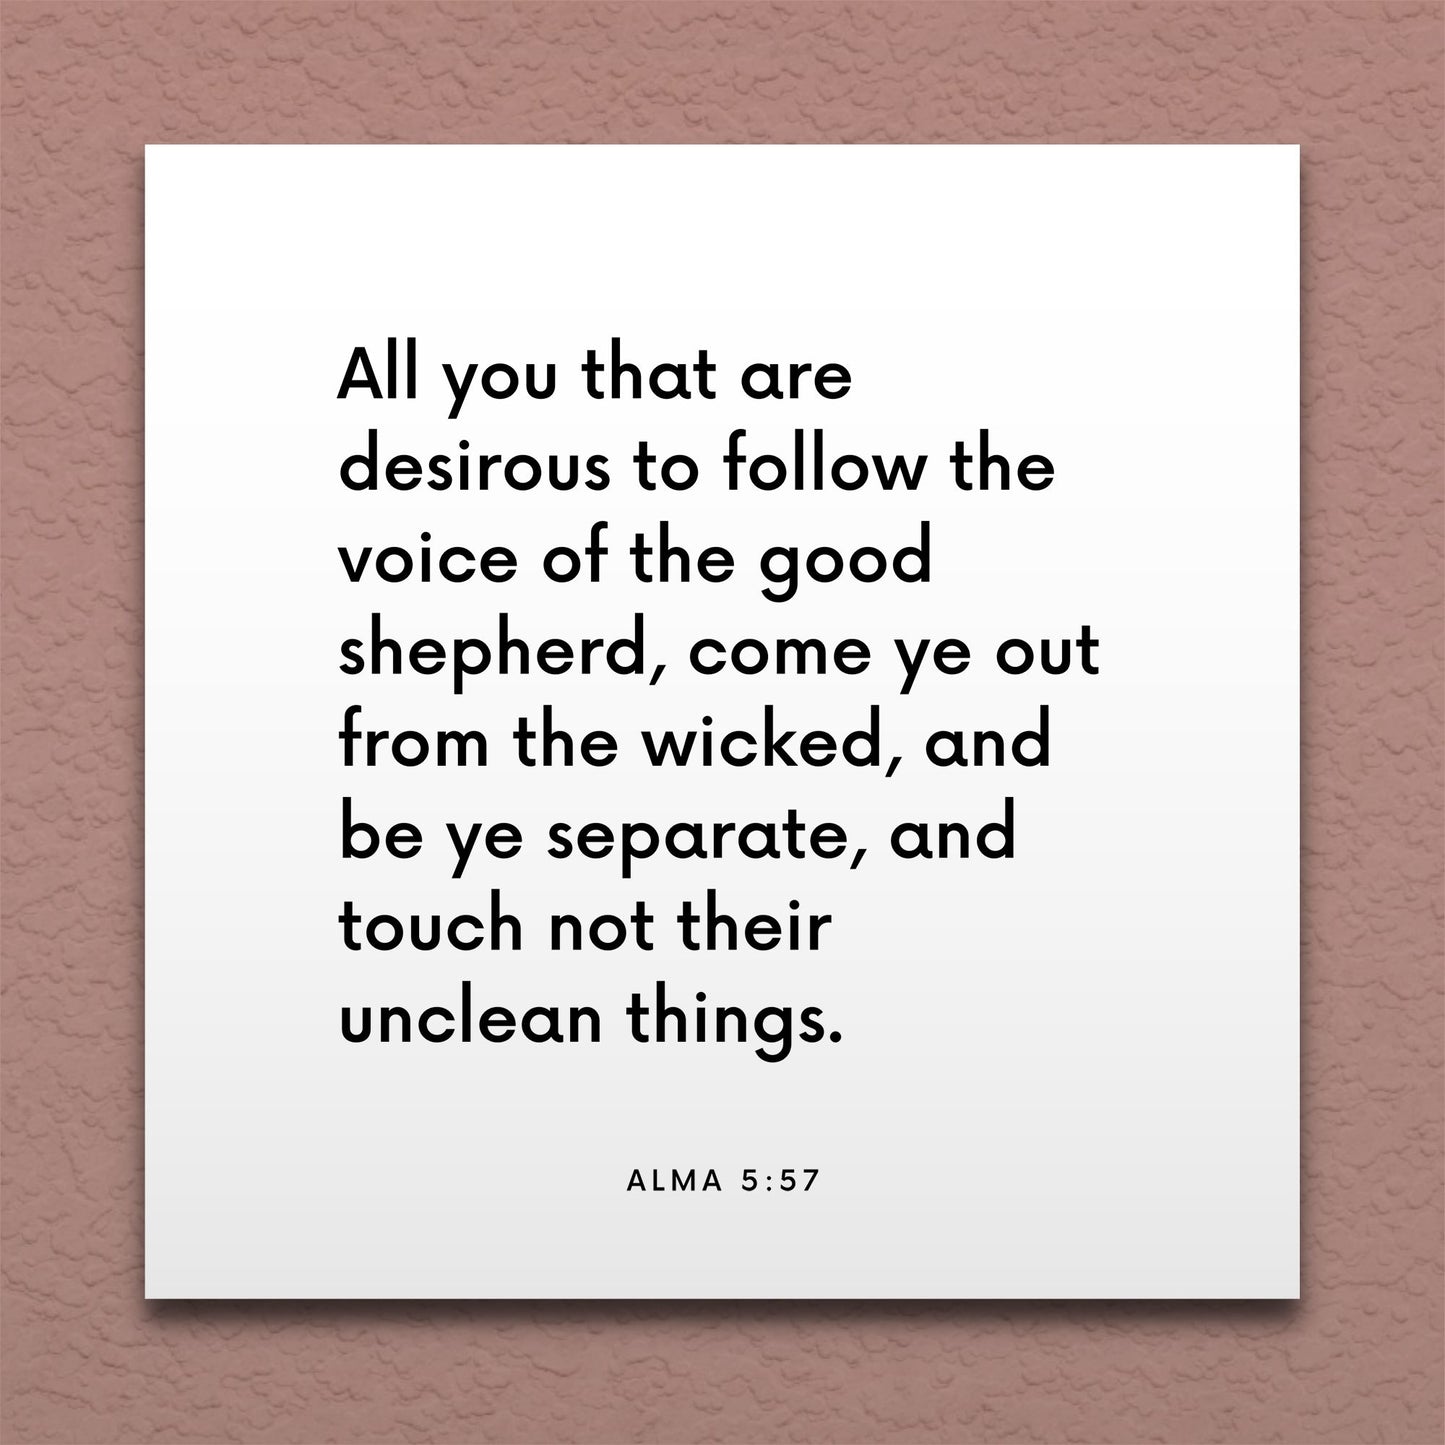 Wall-mounted scripture tile for Alma 5:57 - "Touch not their unclean things"